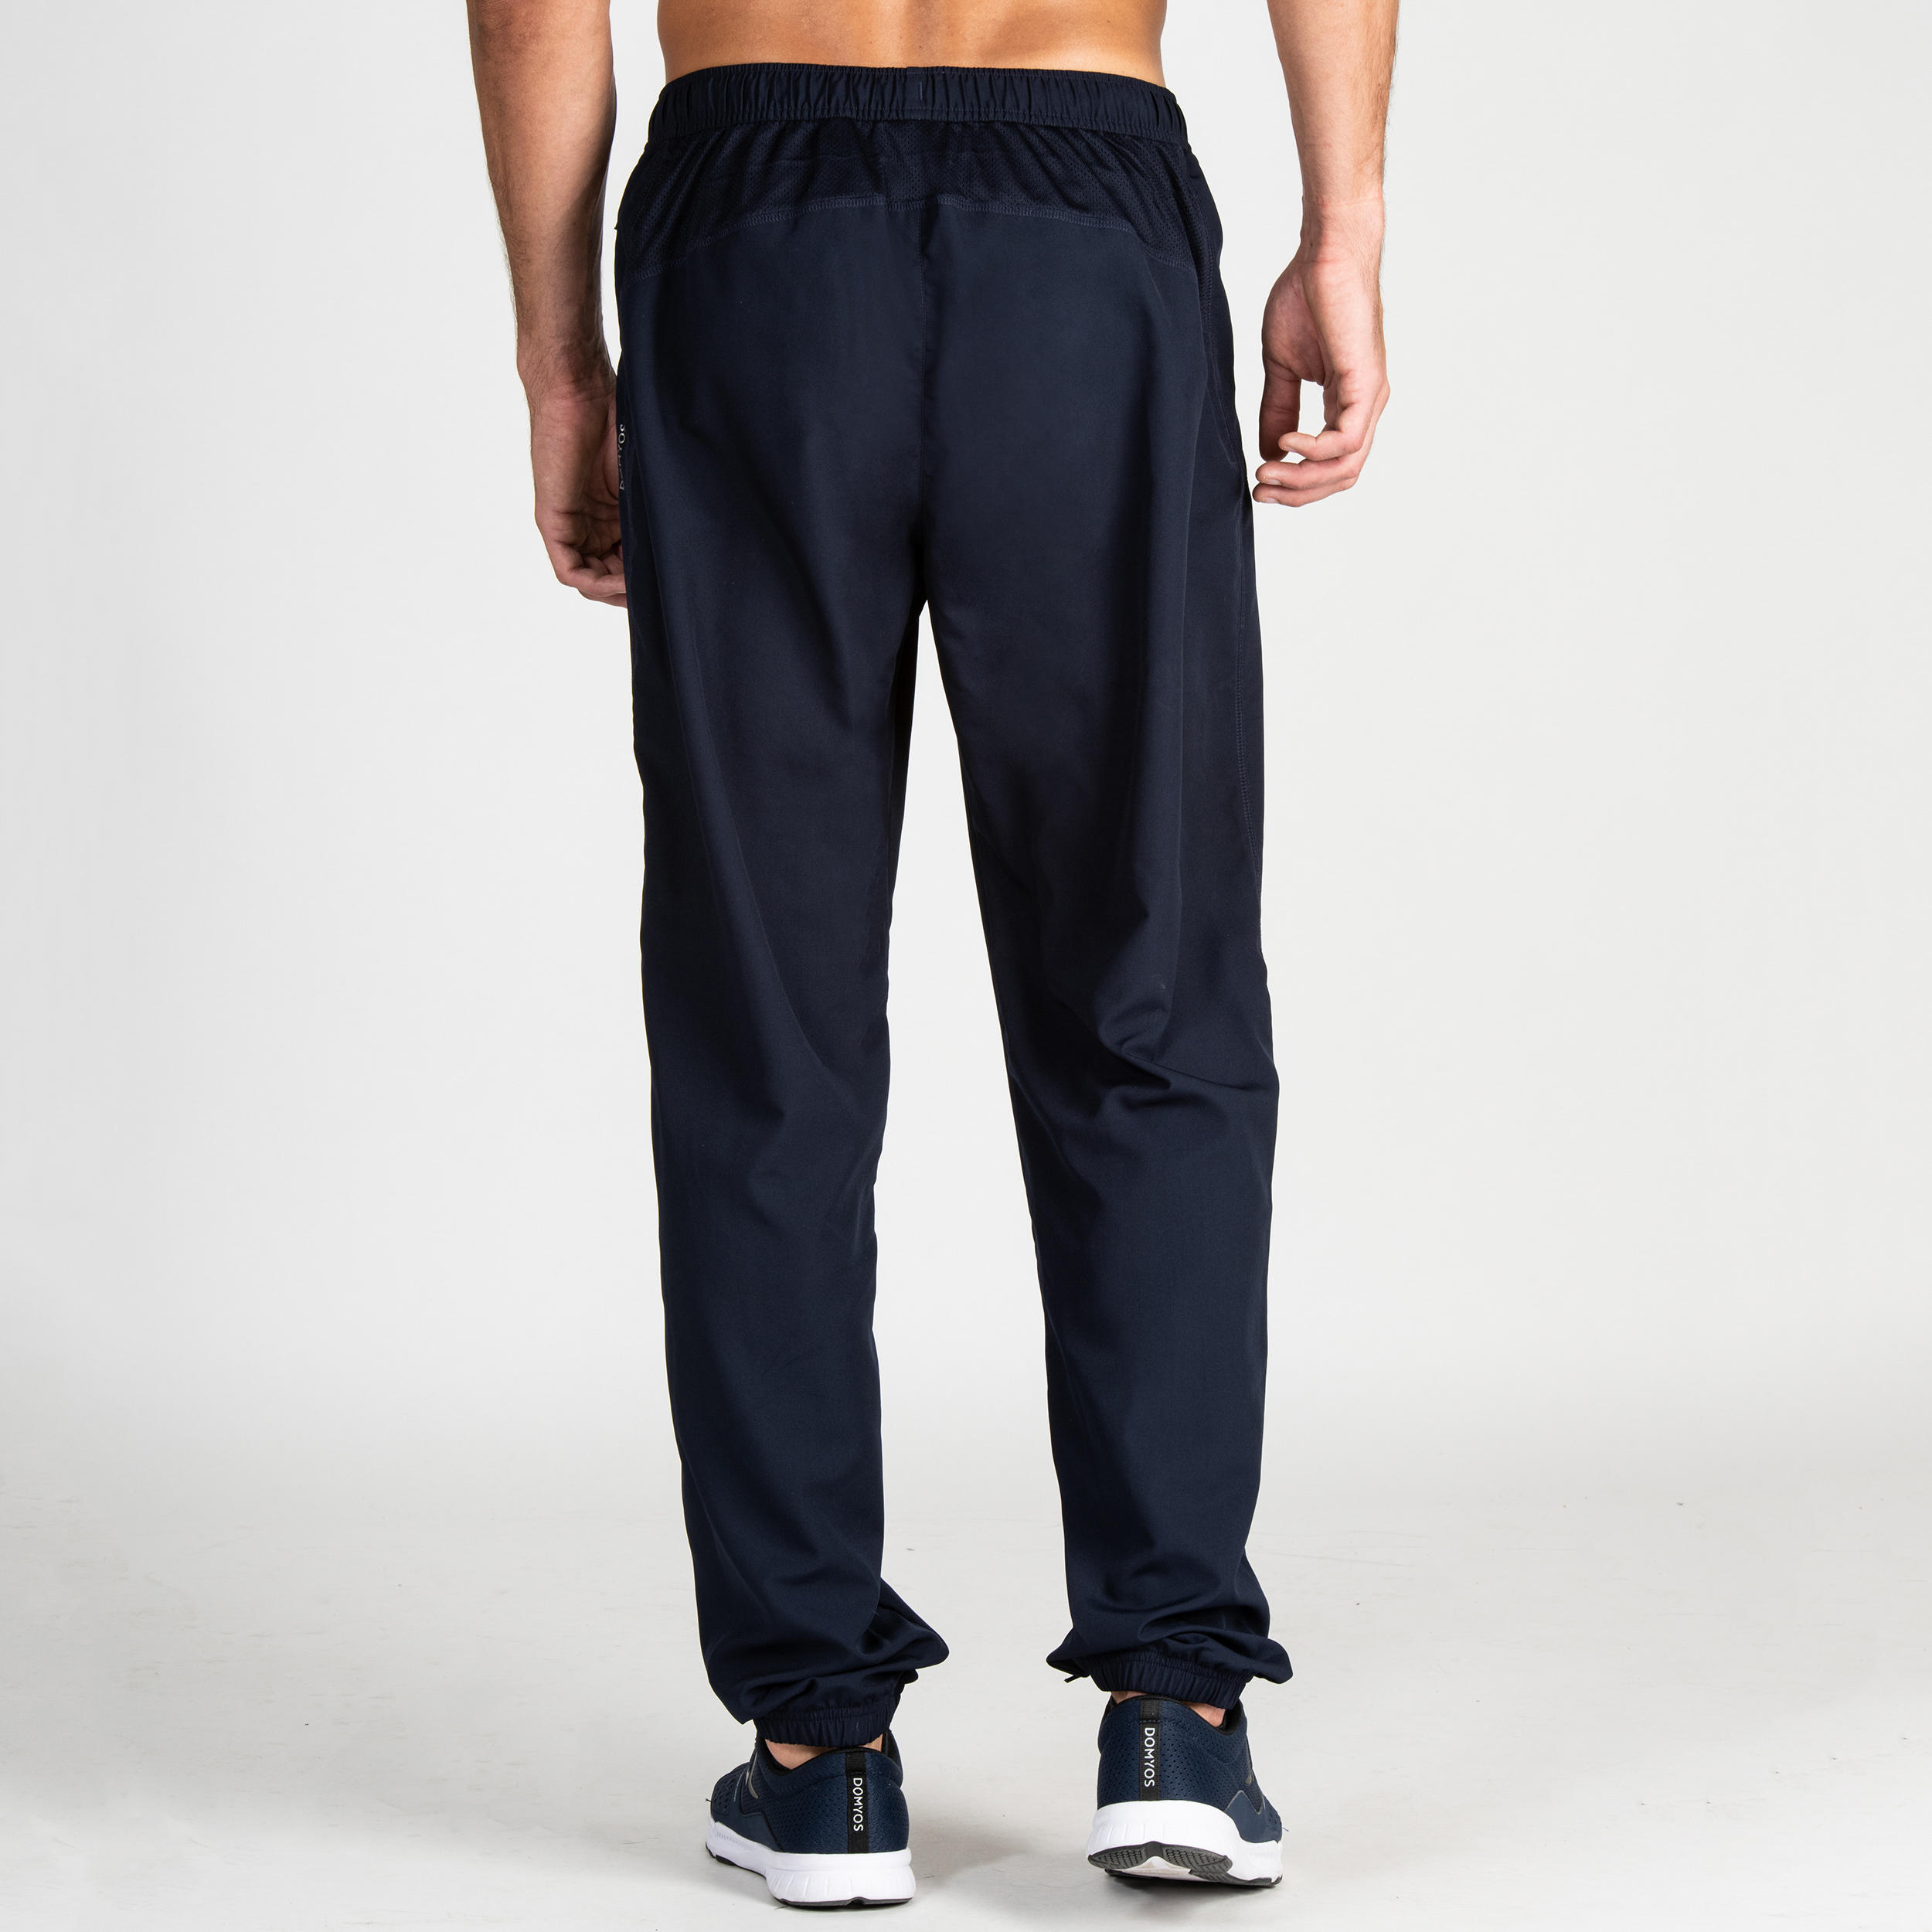 Domyos By Decathlon Men Solid Grey Quick Dry Training Track Pants :  Amazon.in: Clothing & Accessories